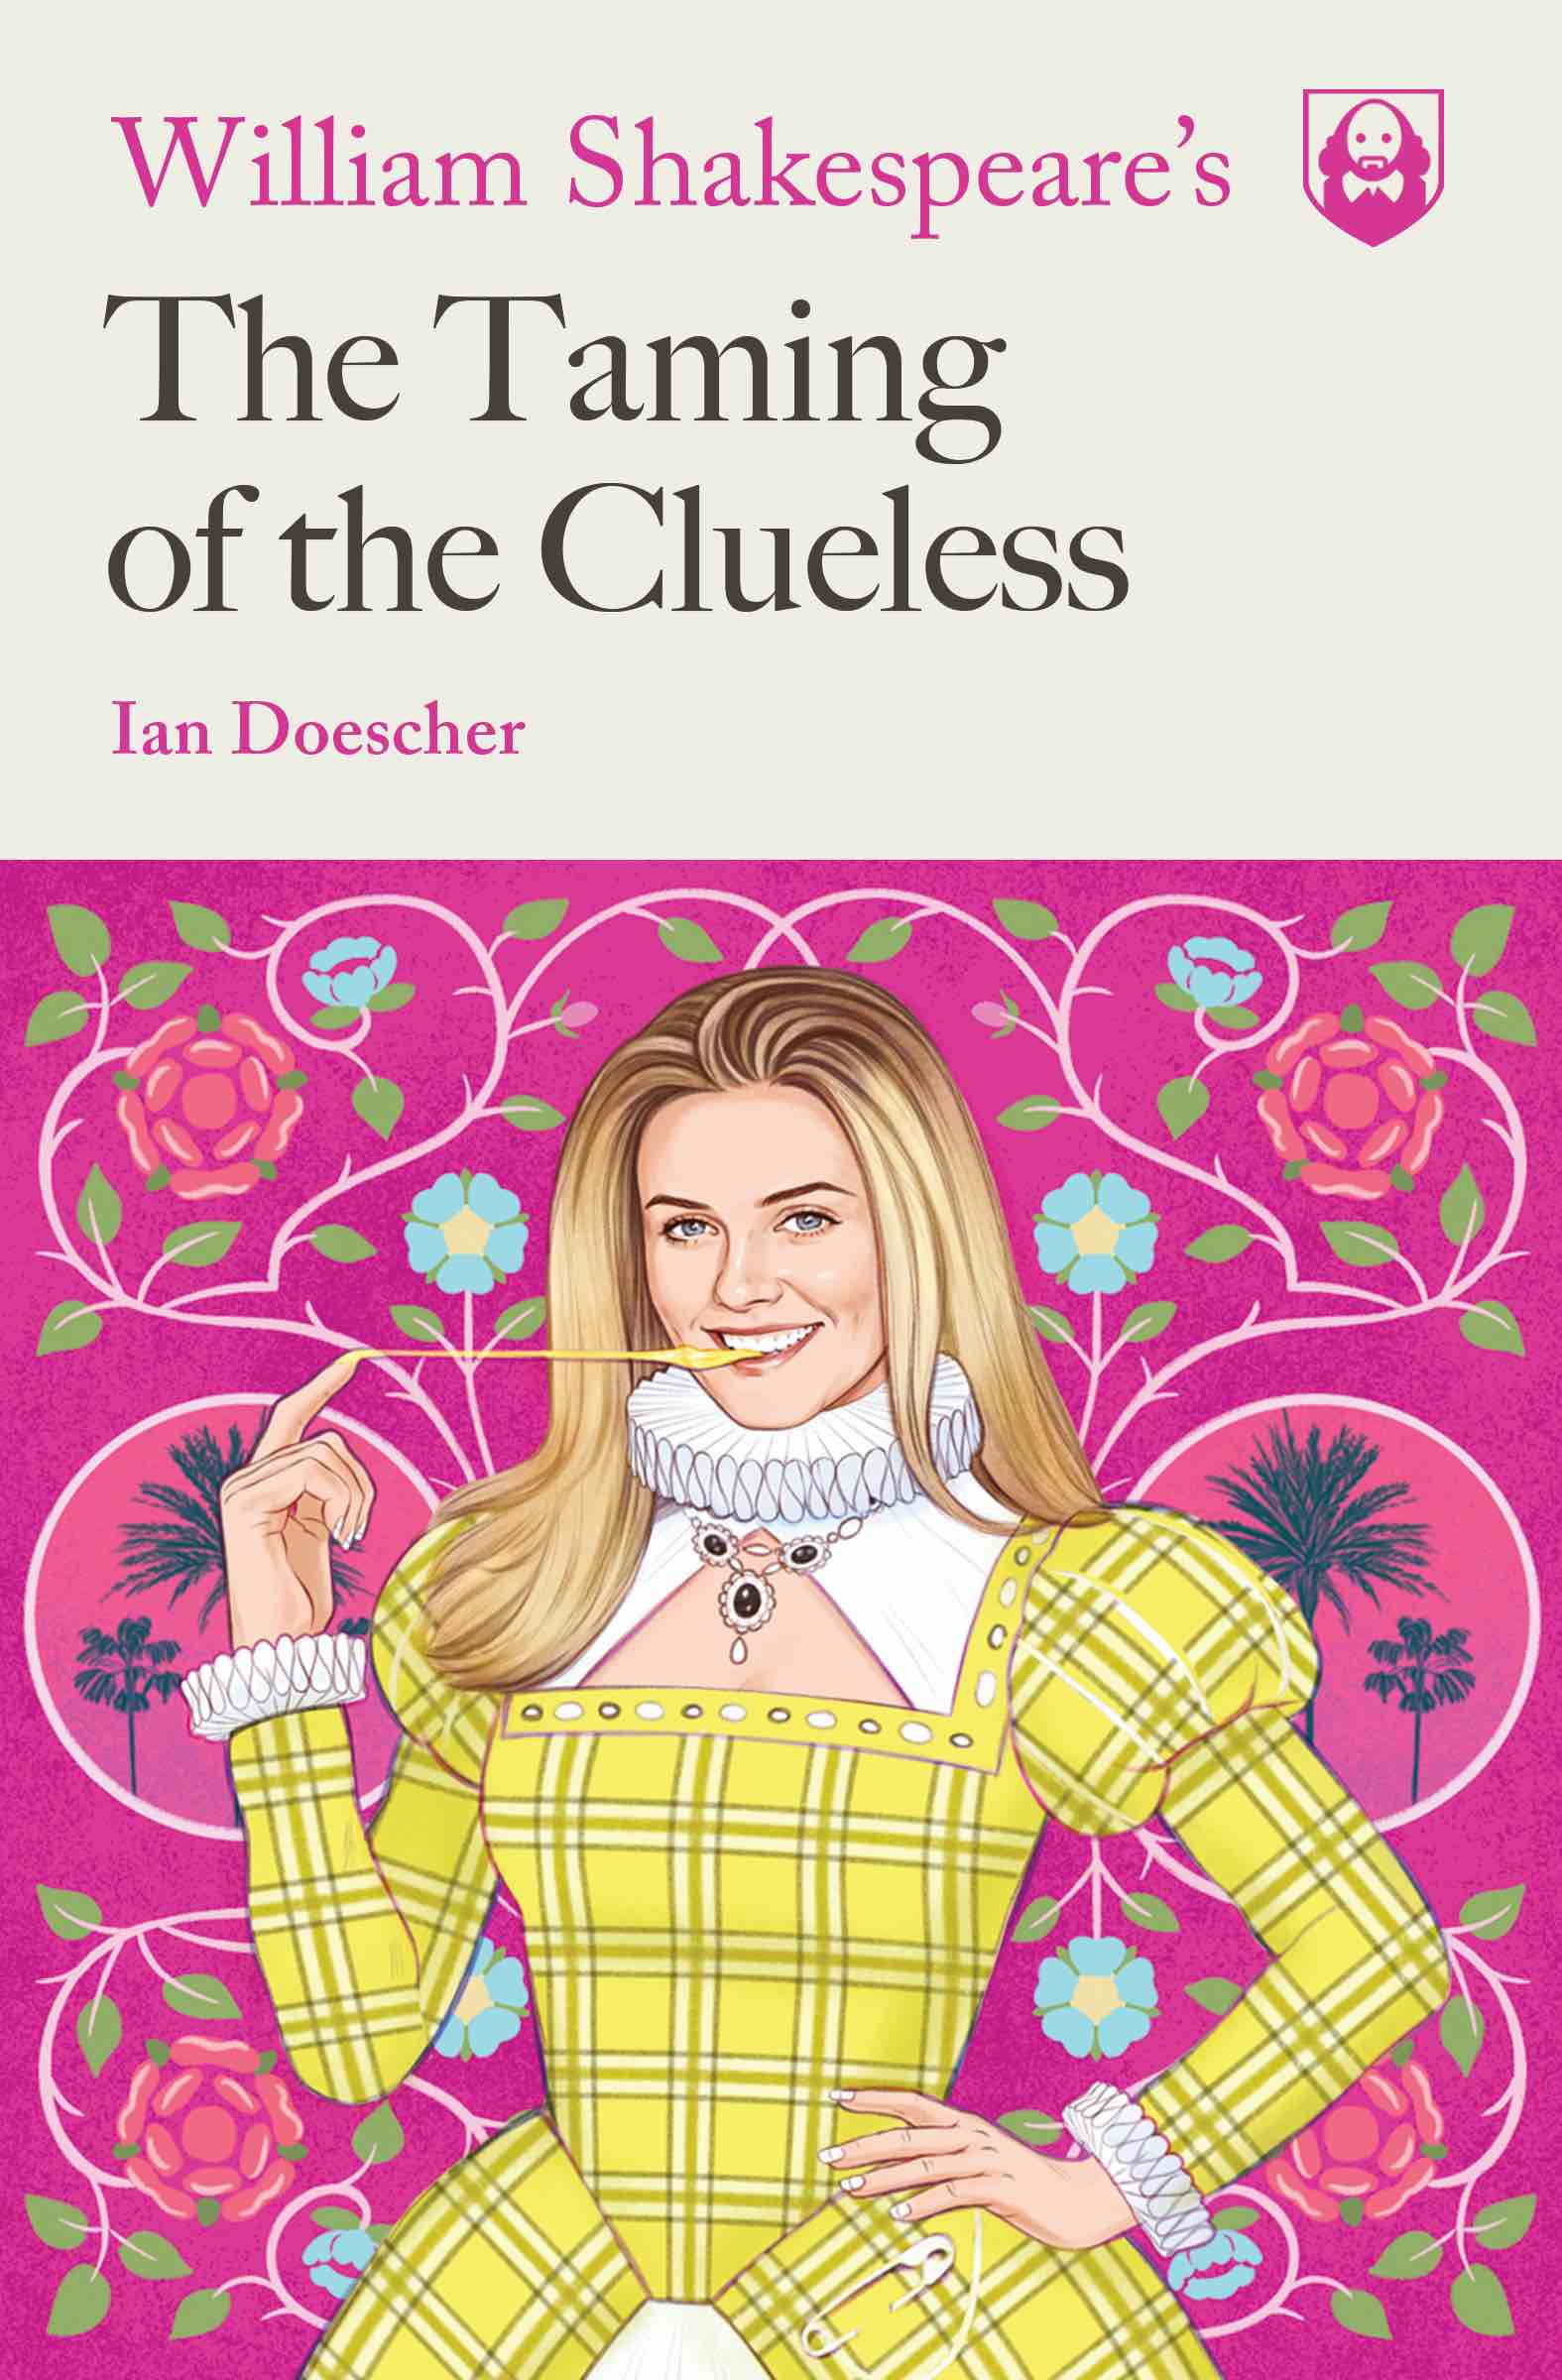 William Shakespeare's Taming of the Clueless